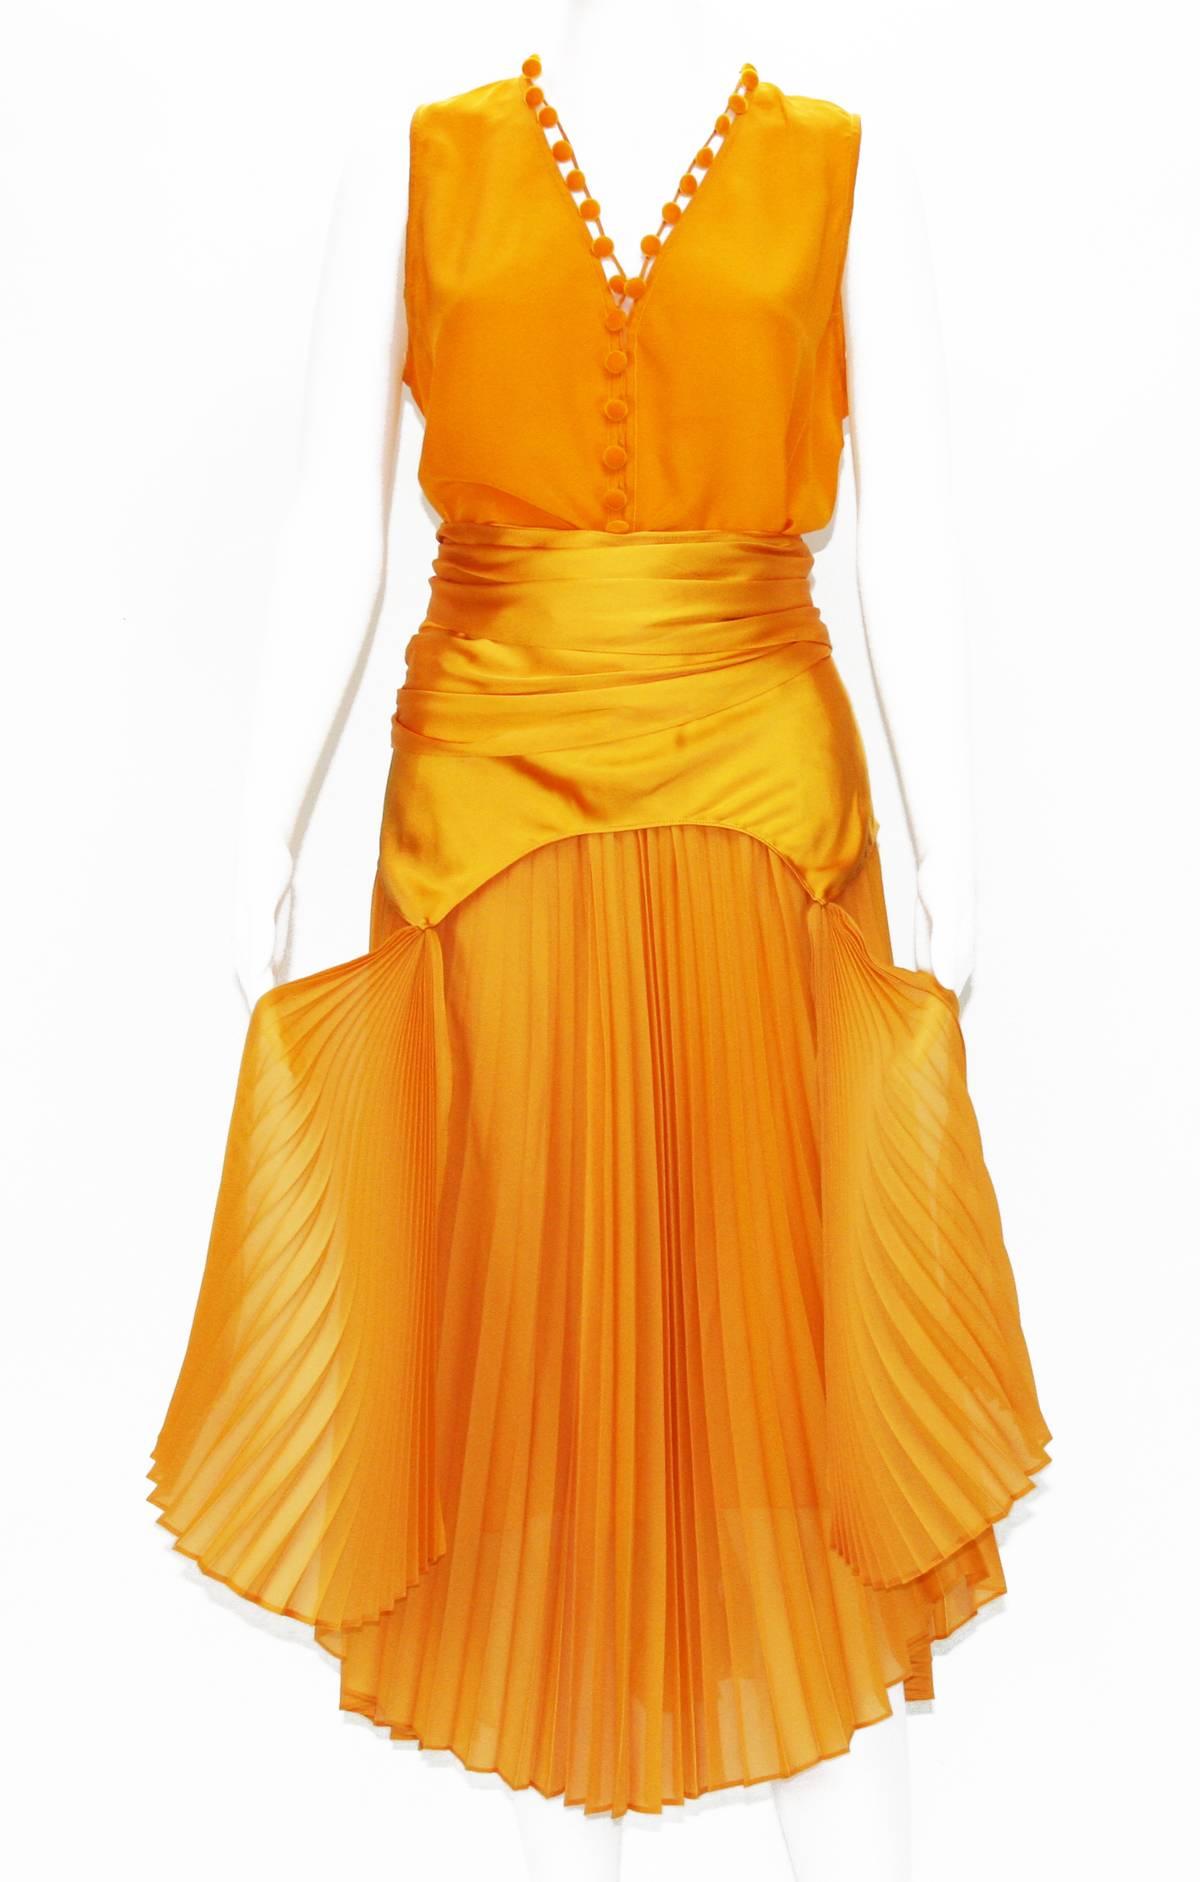 Tom Ford for Yves Saint Laurent Silk Orange Top Skirt Set 
S/S 2004 Collection
100% Orange Silk
Top - French size 38, Velvet Buttons Closure, New with Tag.
Measurements: Length - front (26 inches) , back (29), Bust - 36.
Skirt - French size 40,